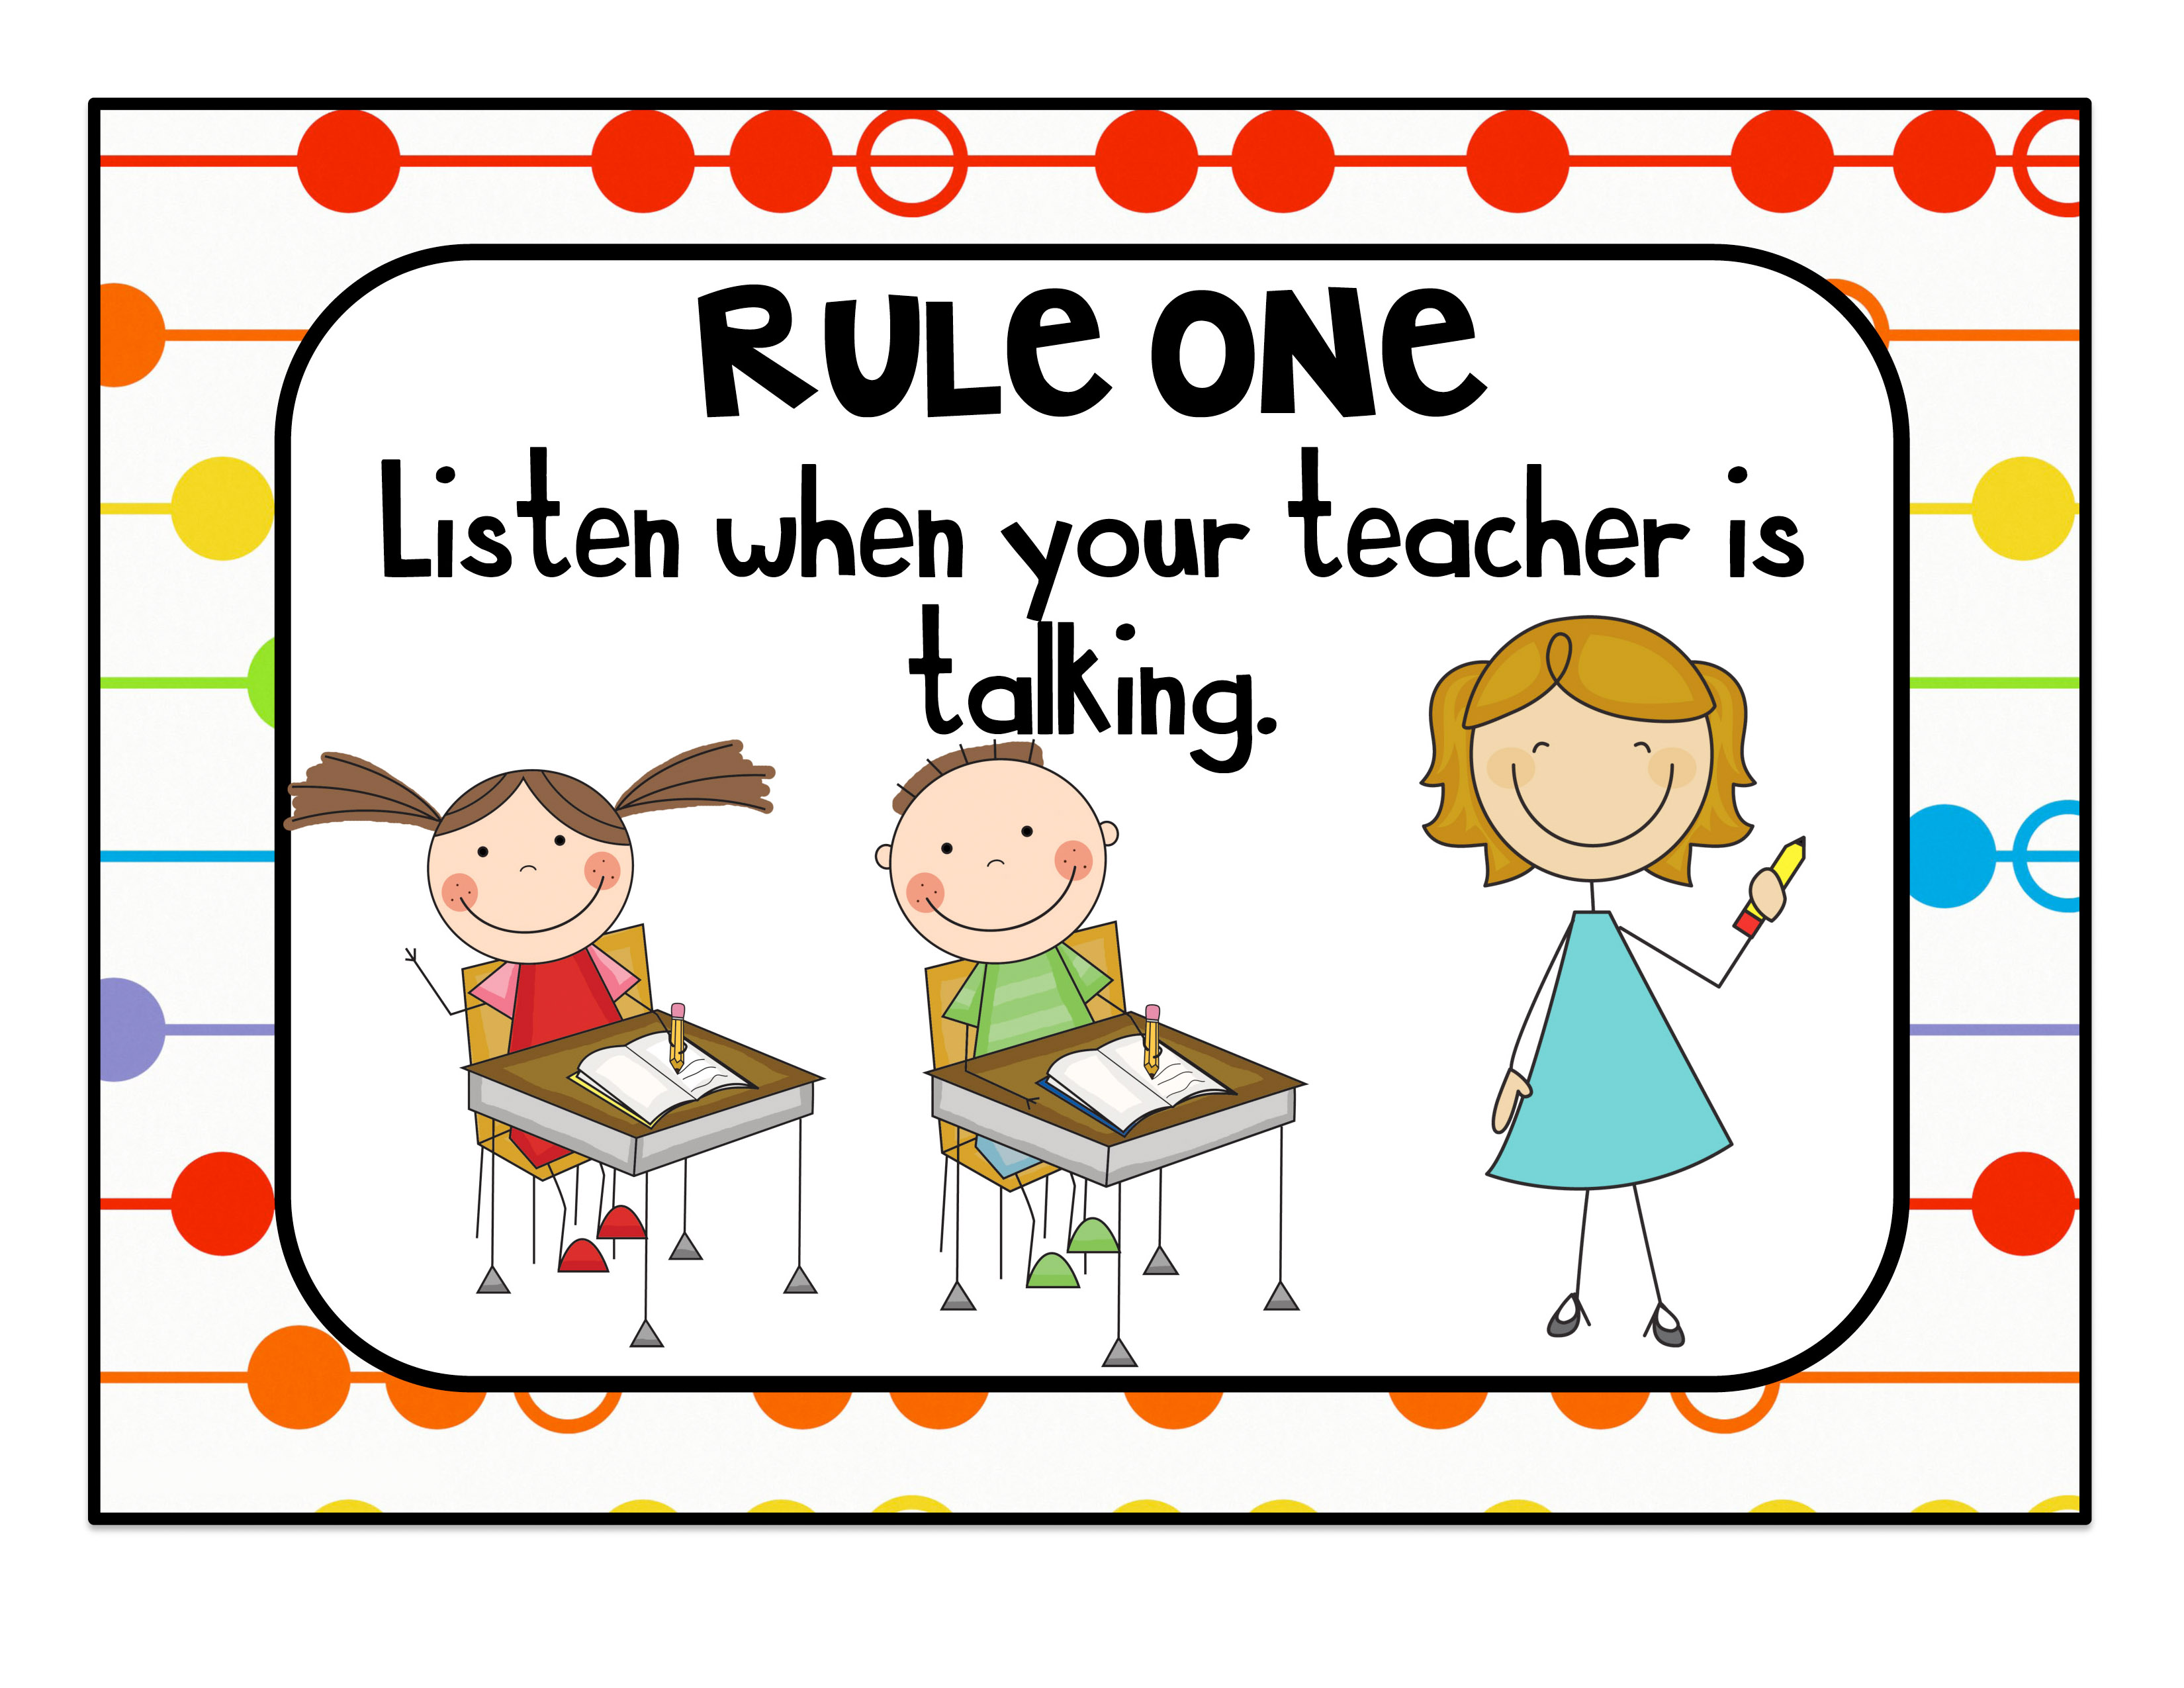 Classroom Rules. Rules in the Classroom for children. Rules in the Classroom. Classroom Rules for pupils. The teacher asked when